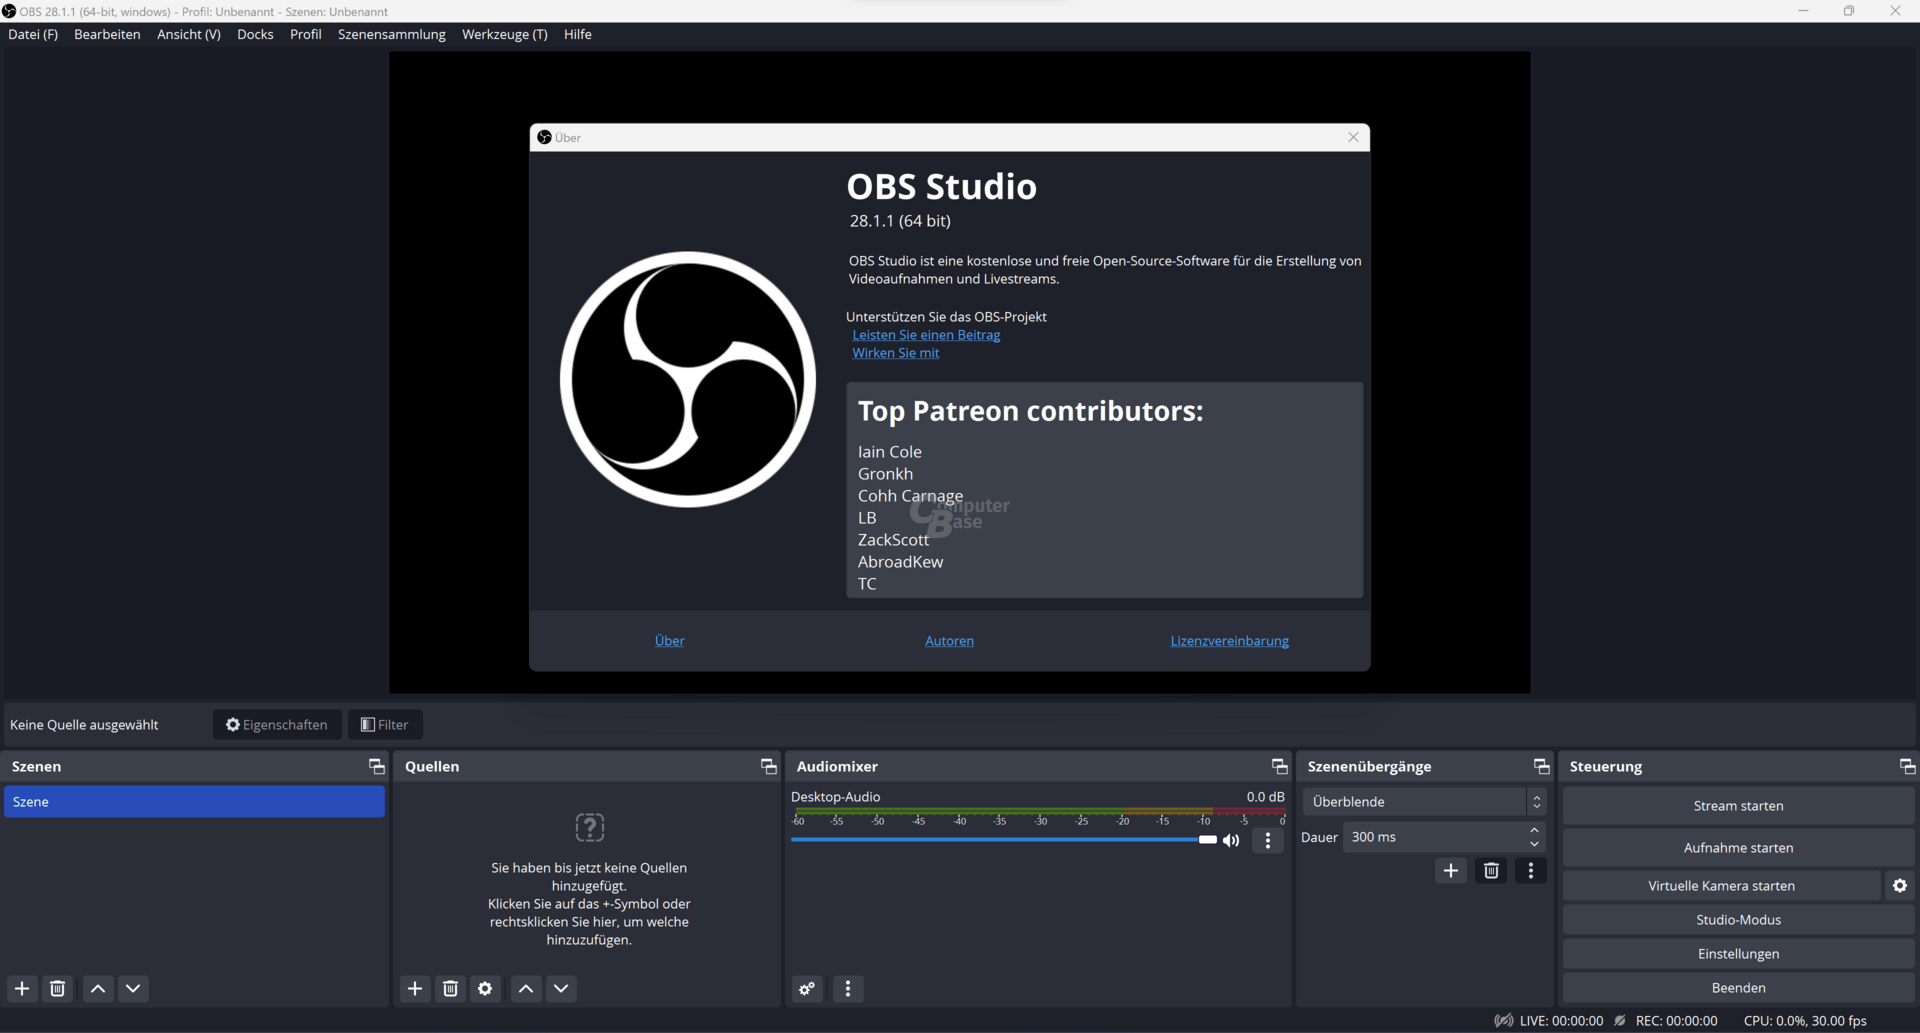 The OBS Studio 28.1.1 graphical user interface (GUI) is based on Qt 6